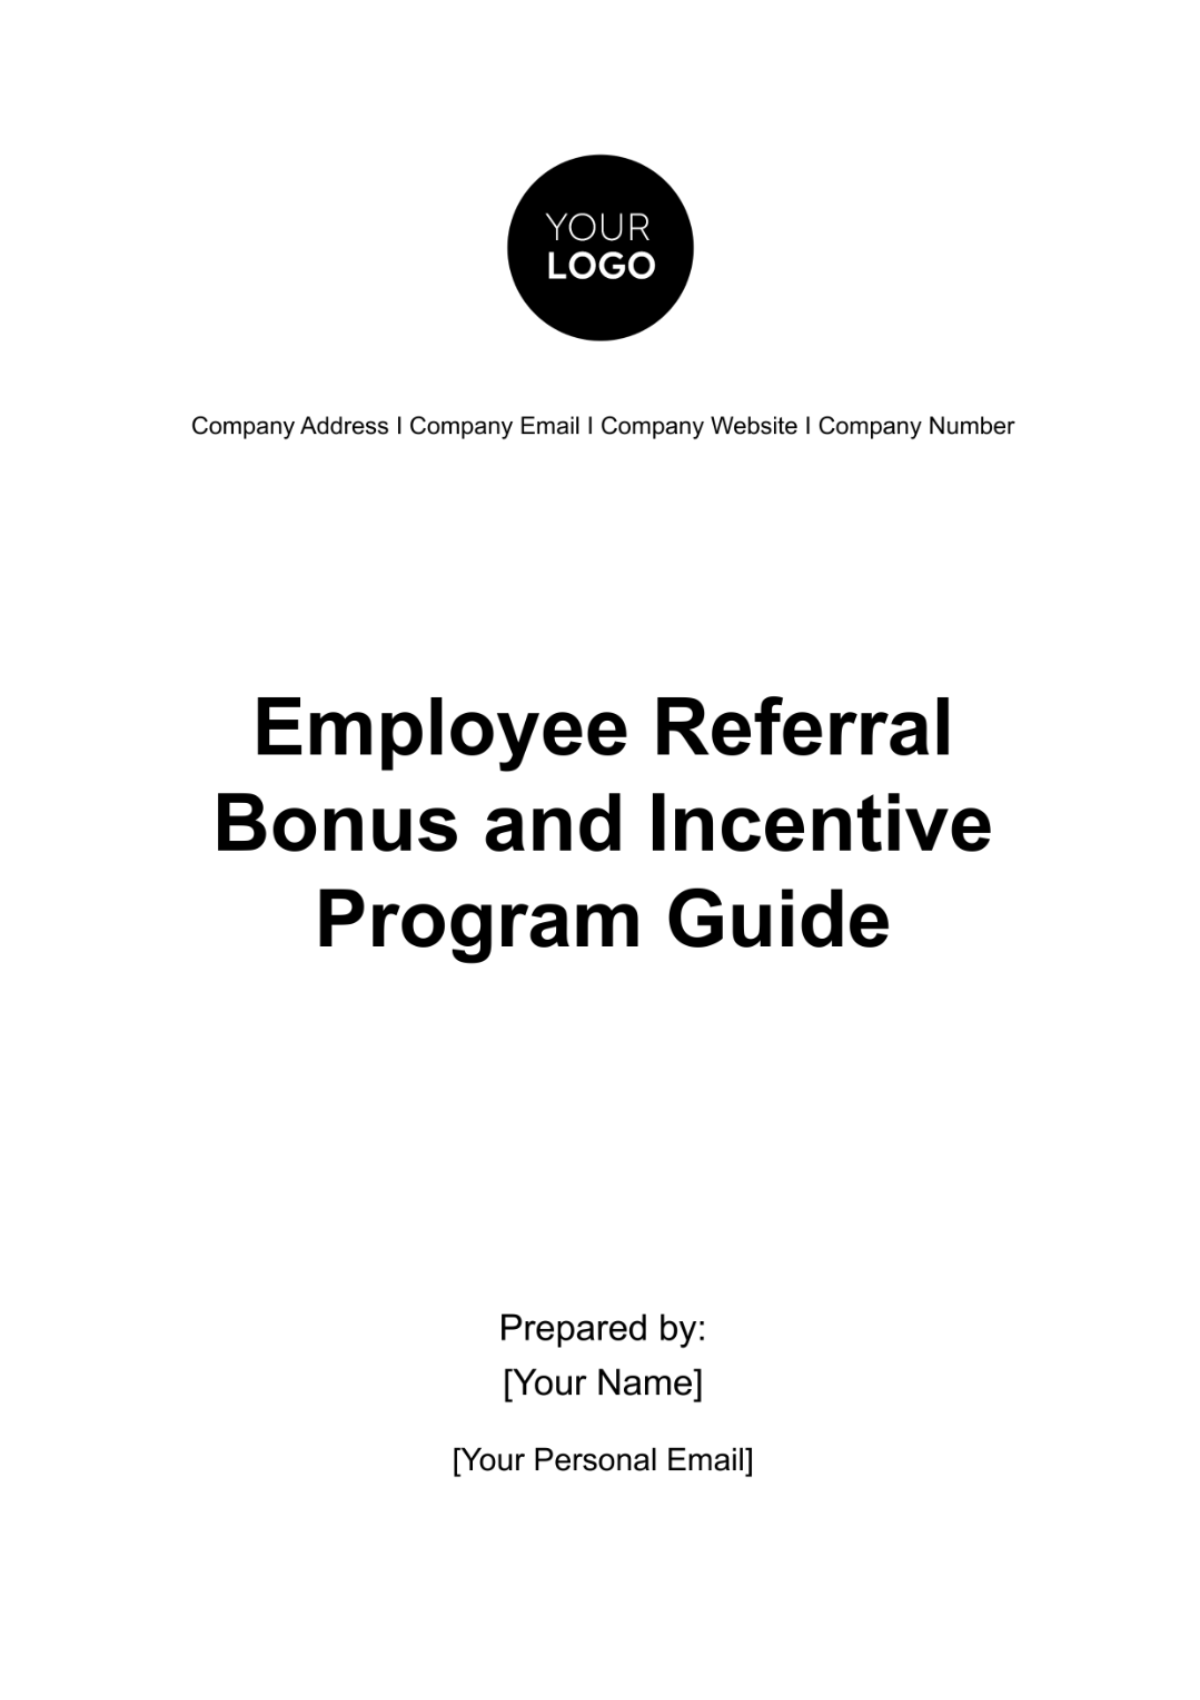 Free Employee Referral Bonus and Incentive Program Guide HR Template